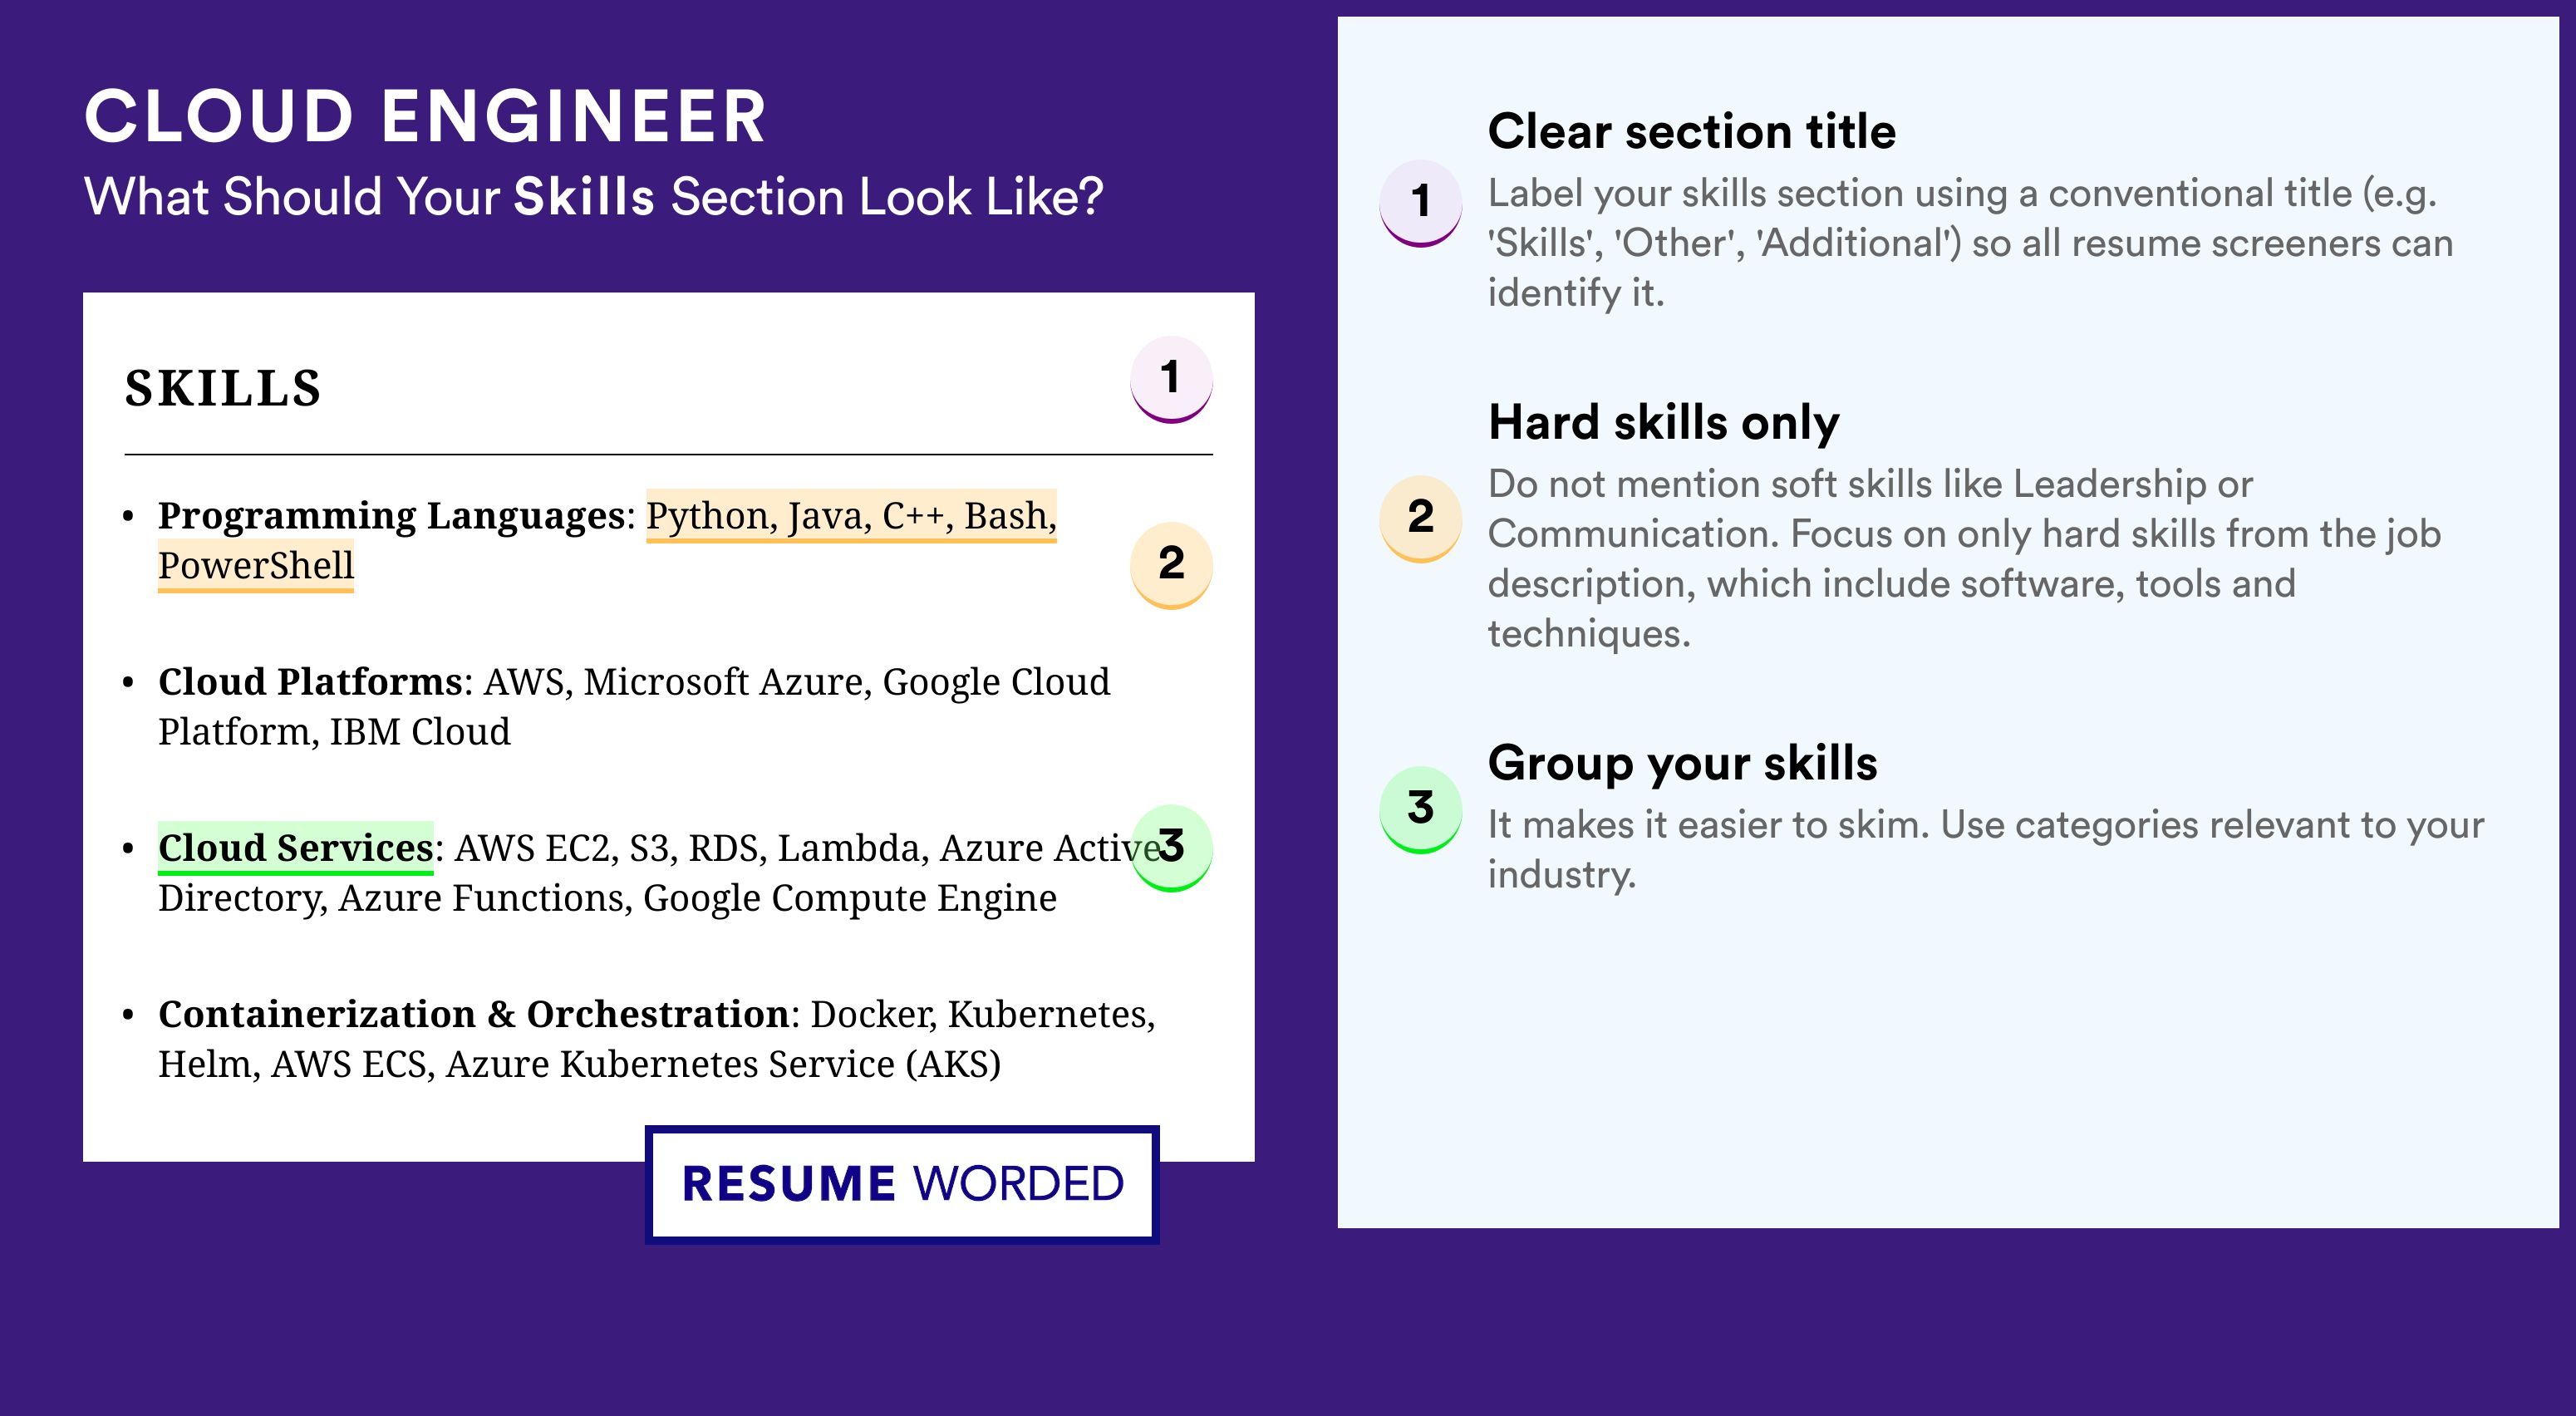 How To Write Your Skills Section - Cloud Engineer Roles